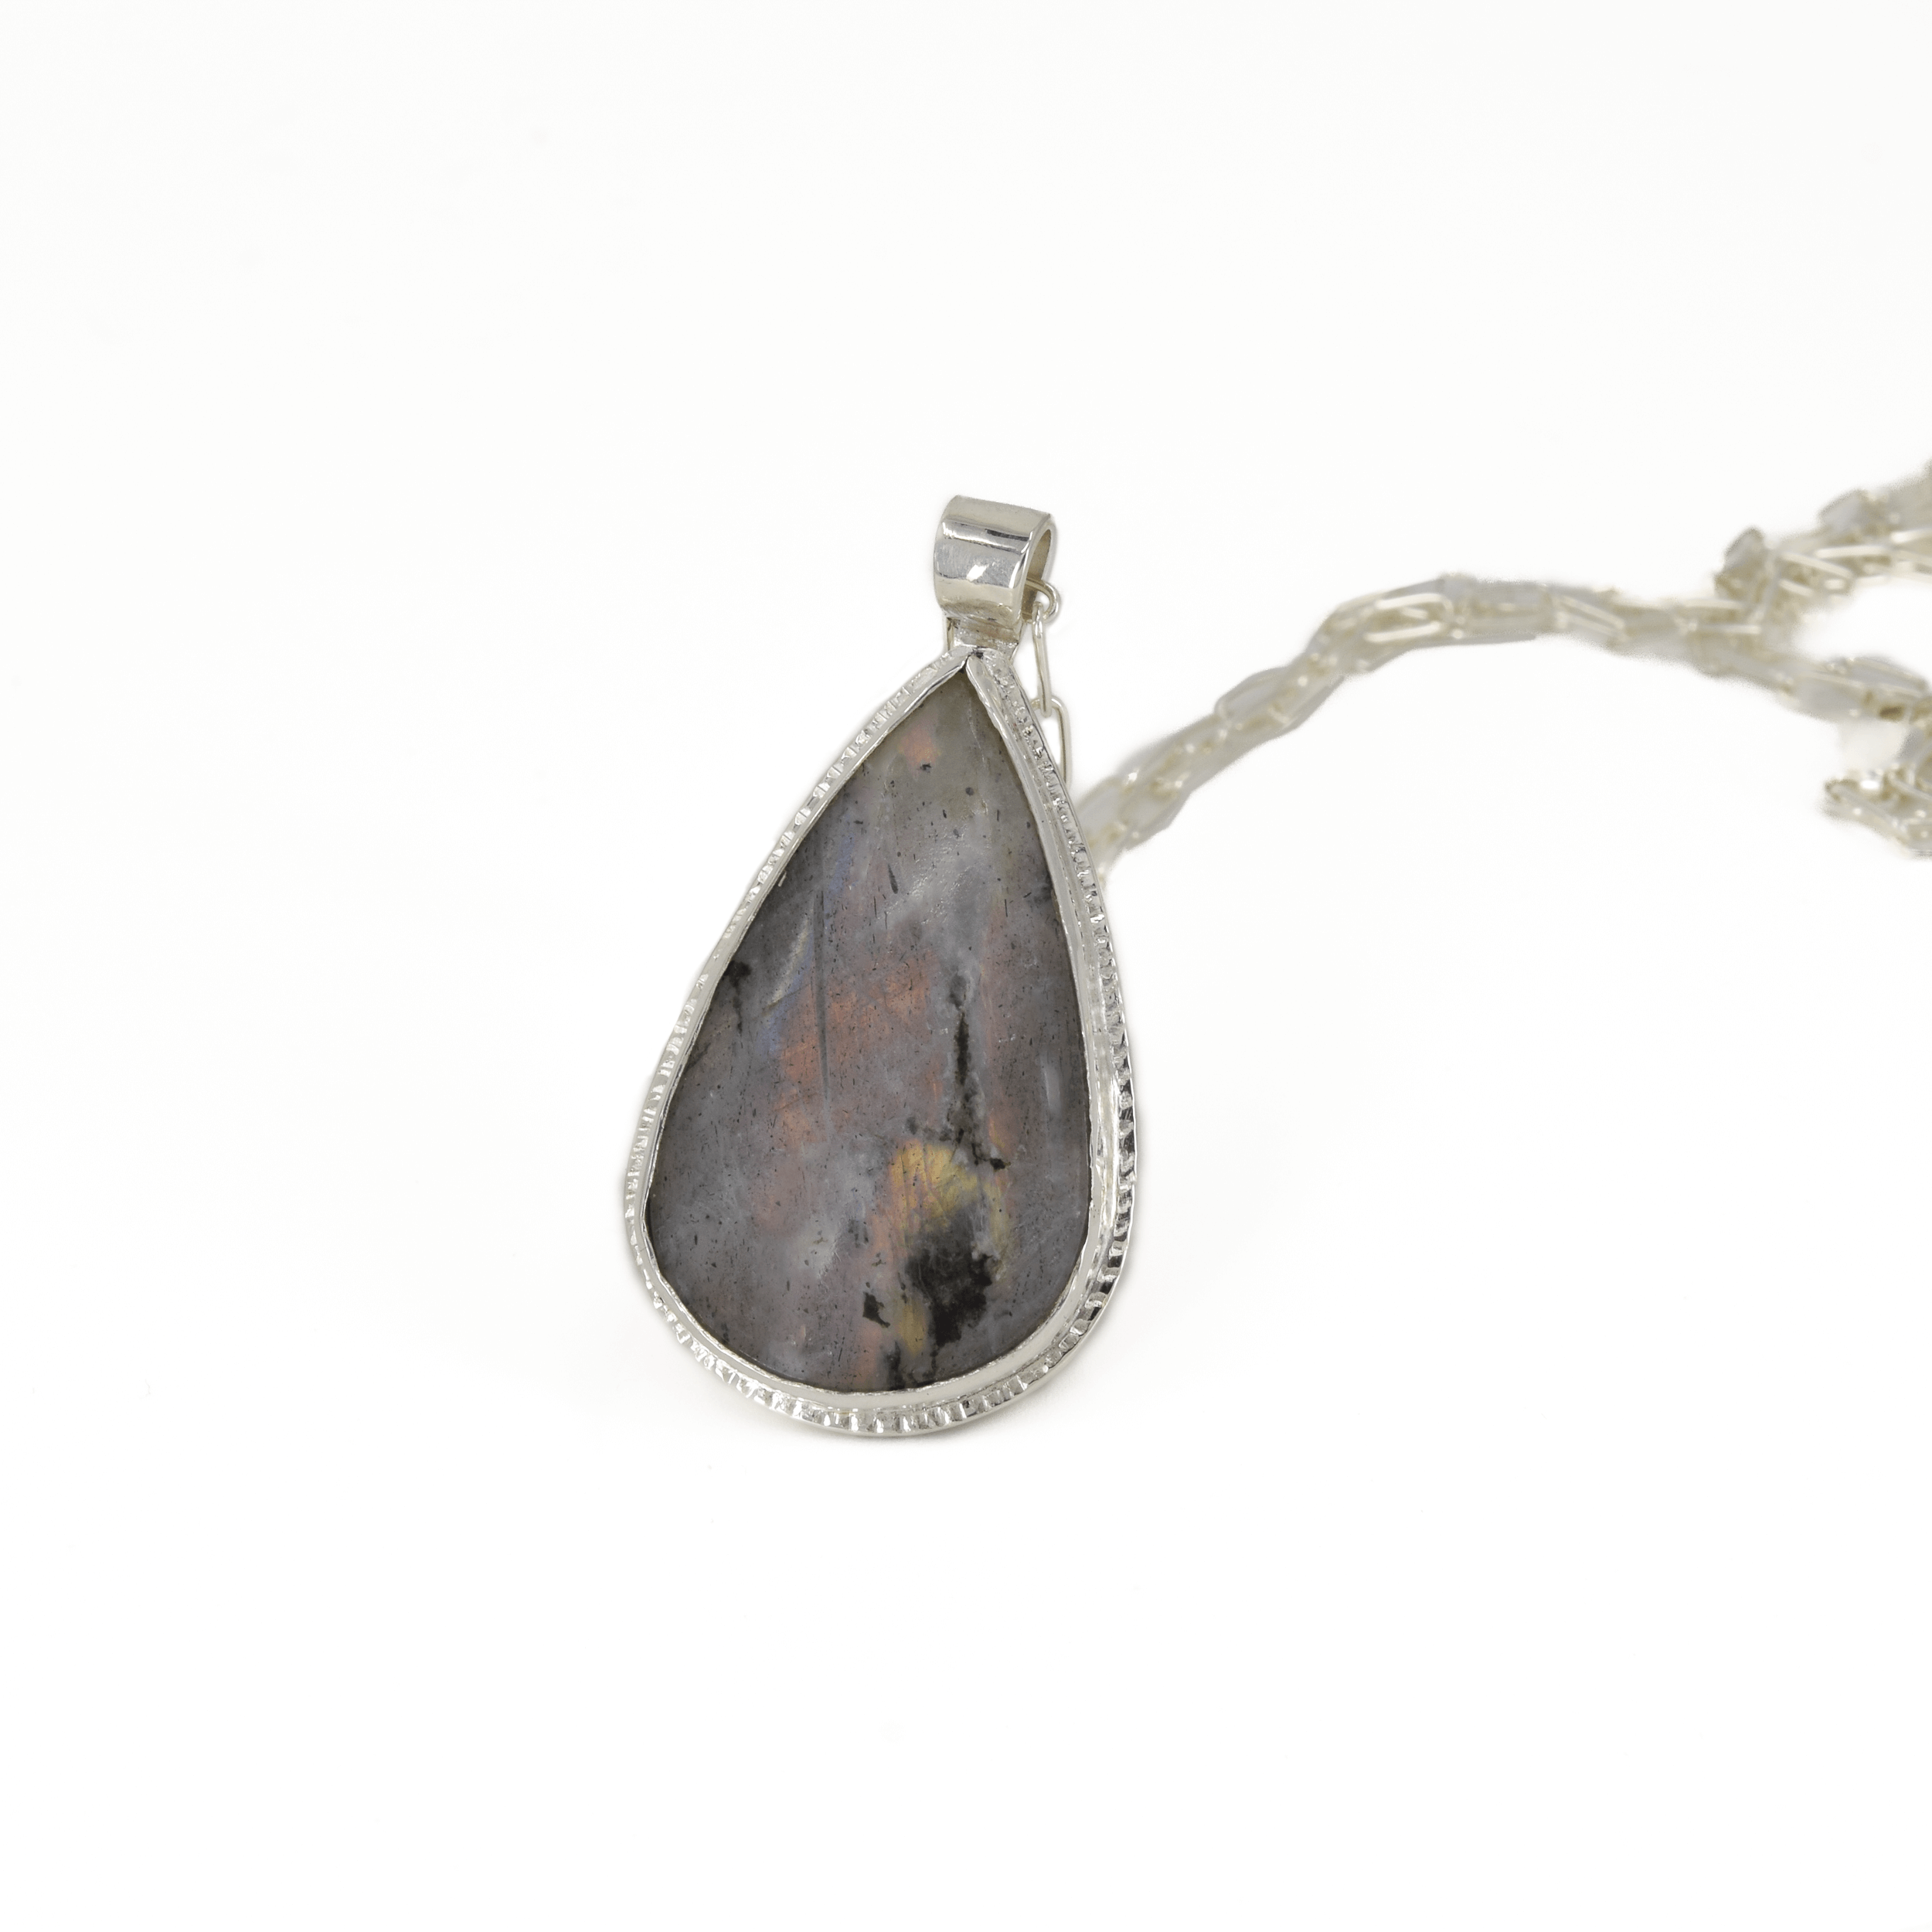 Teardrop shaped silver labradorite pendant with flashes of rainbow colors set in sterling silver, with a hand textured decorative border surrounding the stone and hanging from a paperclip style chain